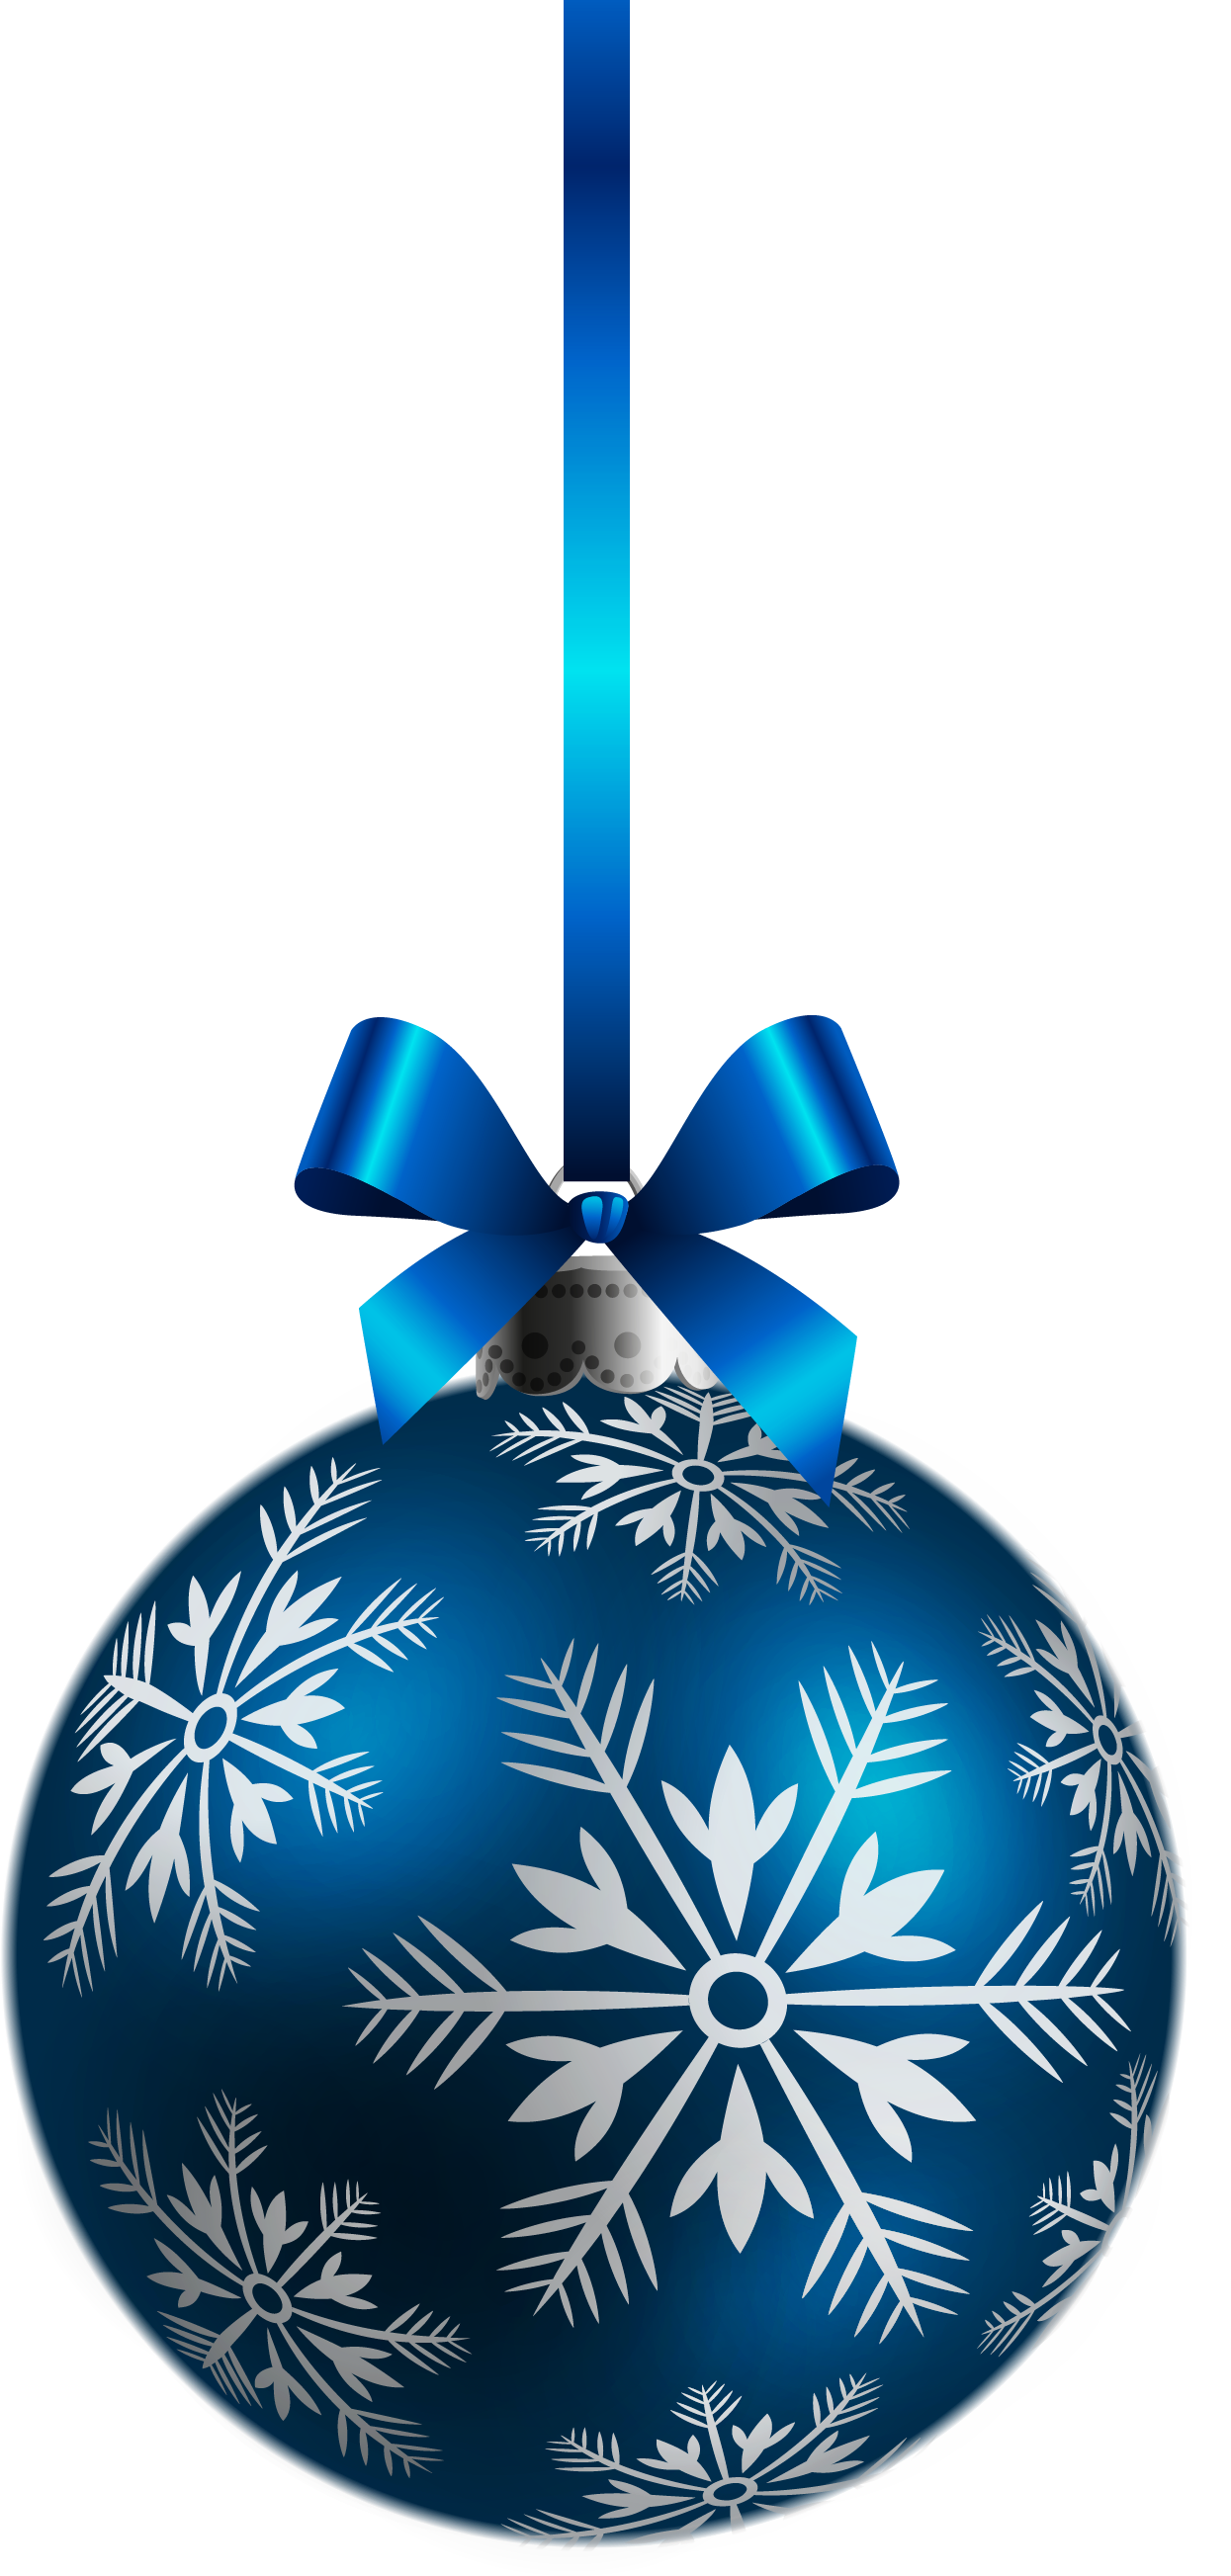 Blue Christmas Bauble Download HQ PNG Image